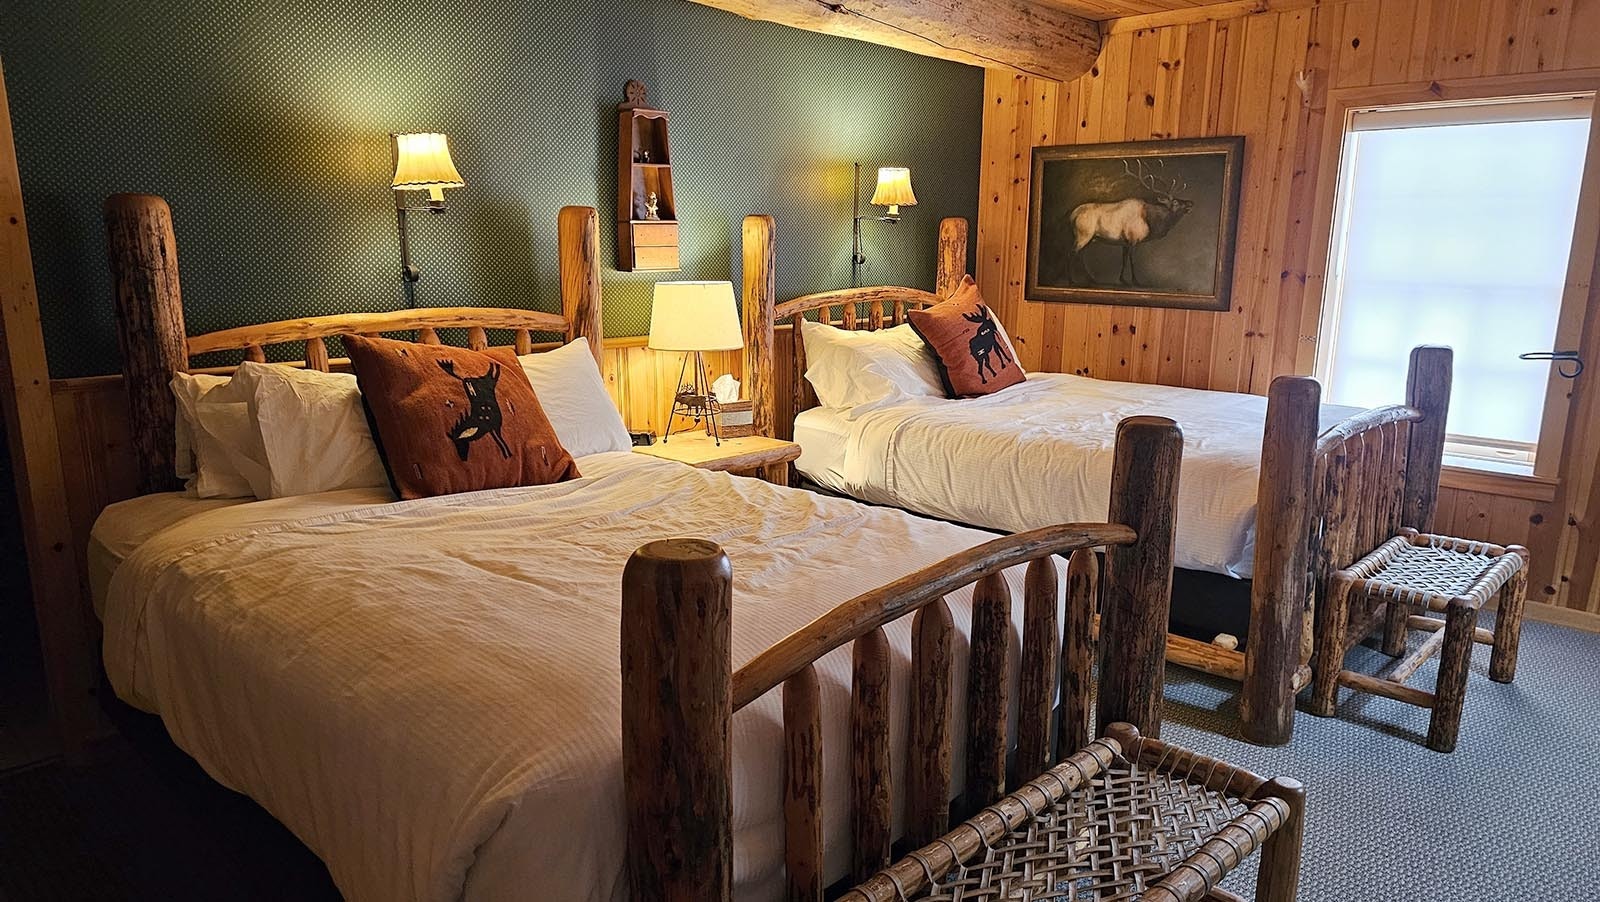 Rooms at Brooks Lake Lodge are cozy with feather beds for sleeping and rustic benches for putting on one's shoes.